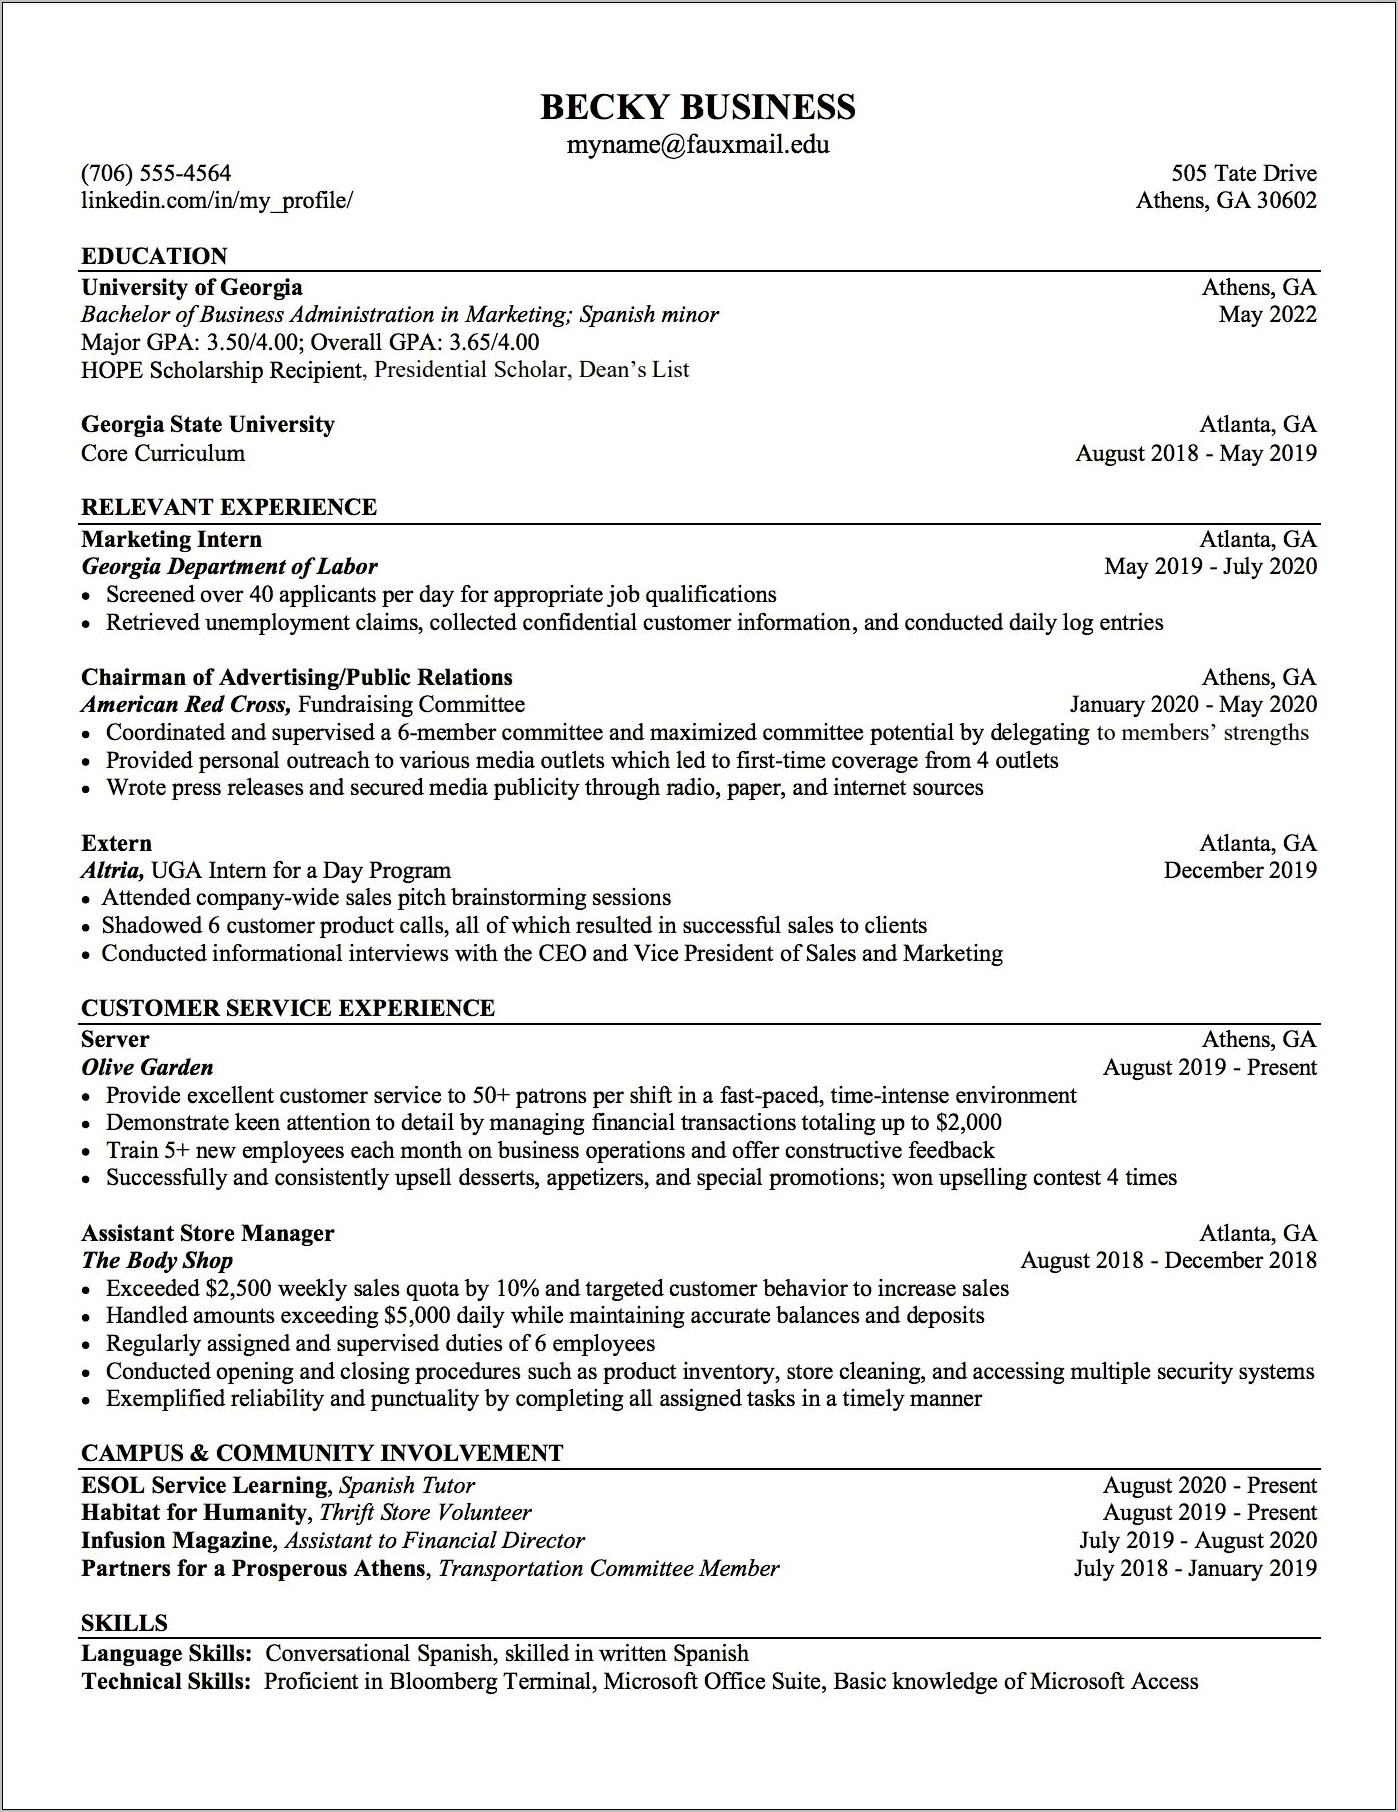 Sample Resume With Multiple College Degrees